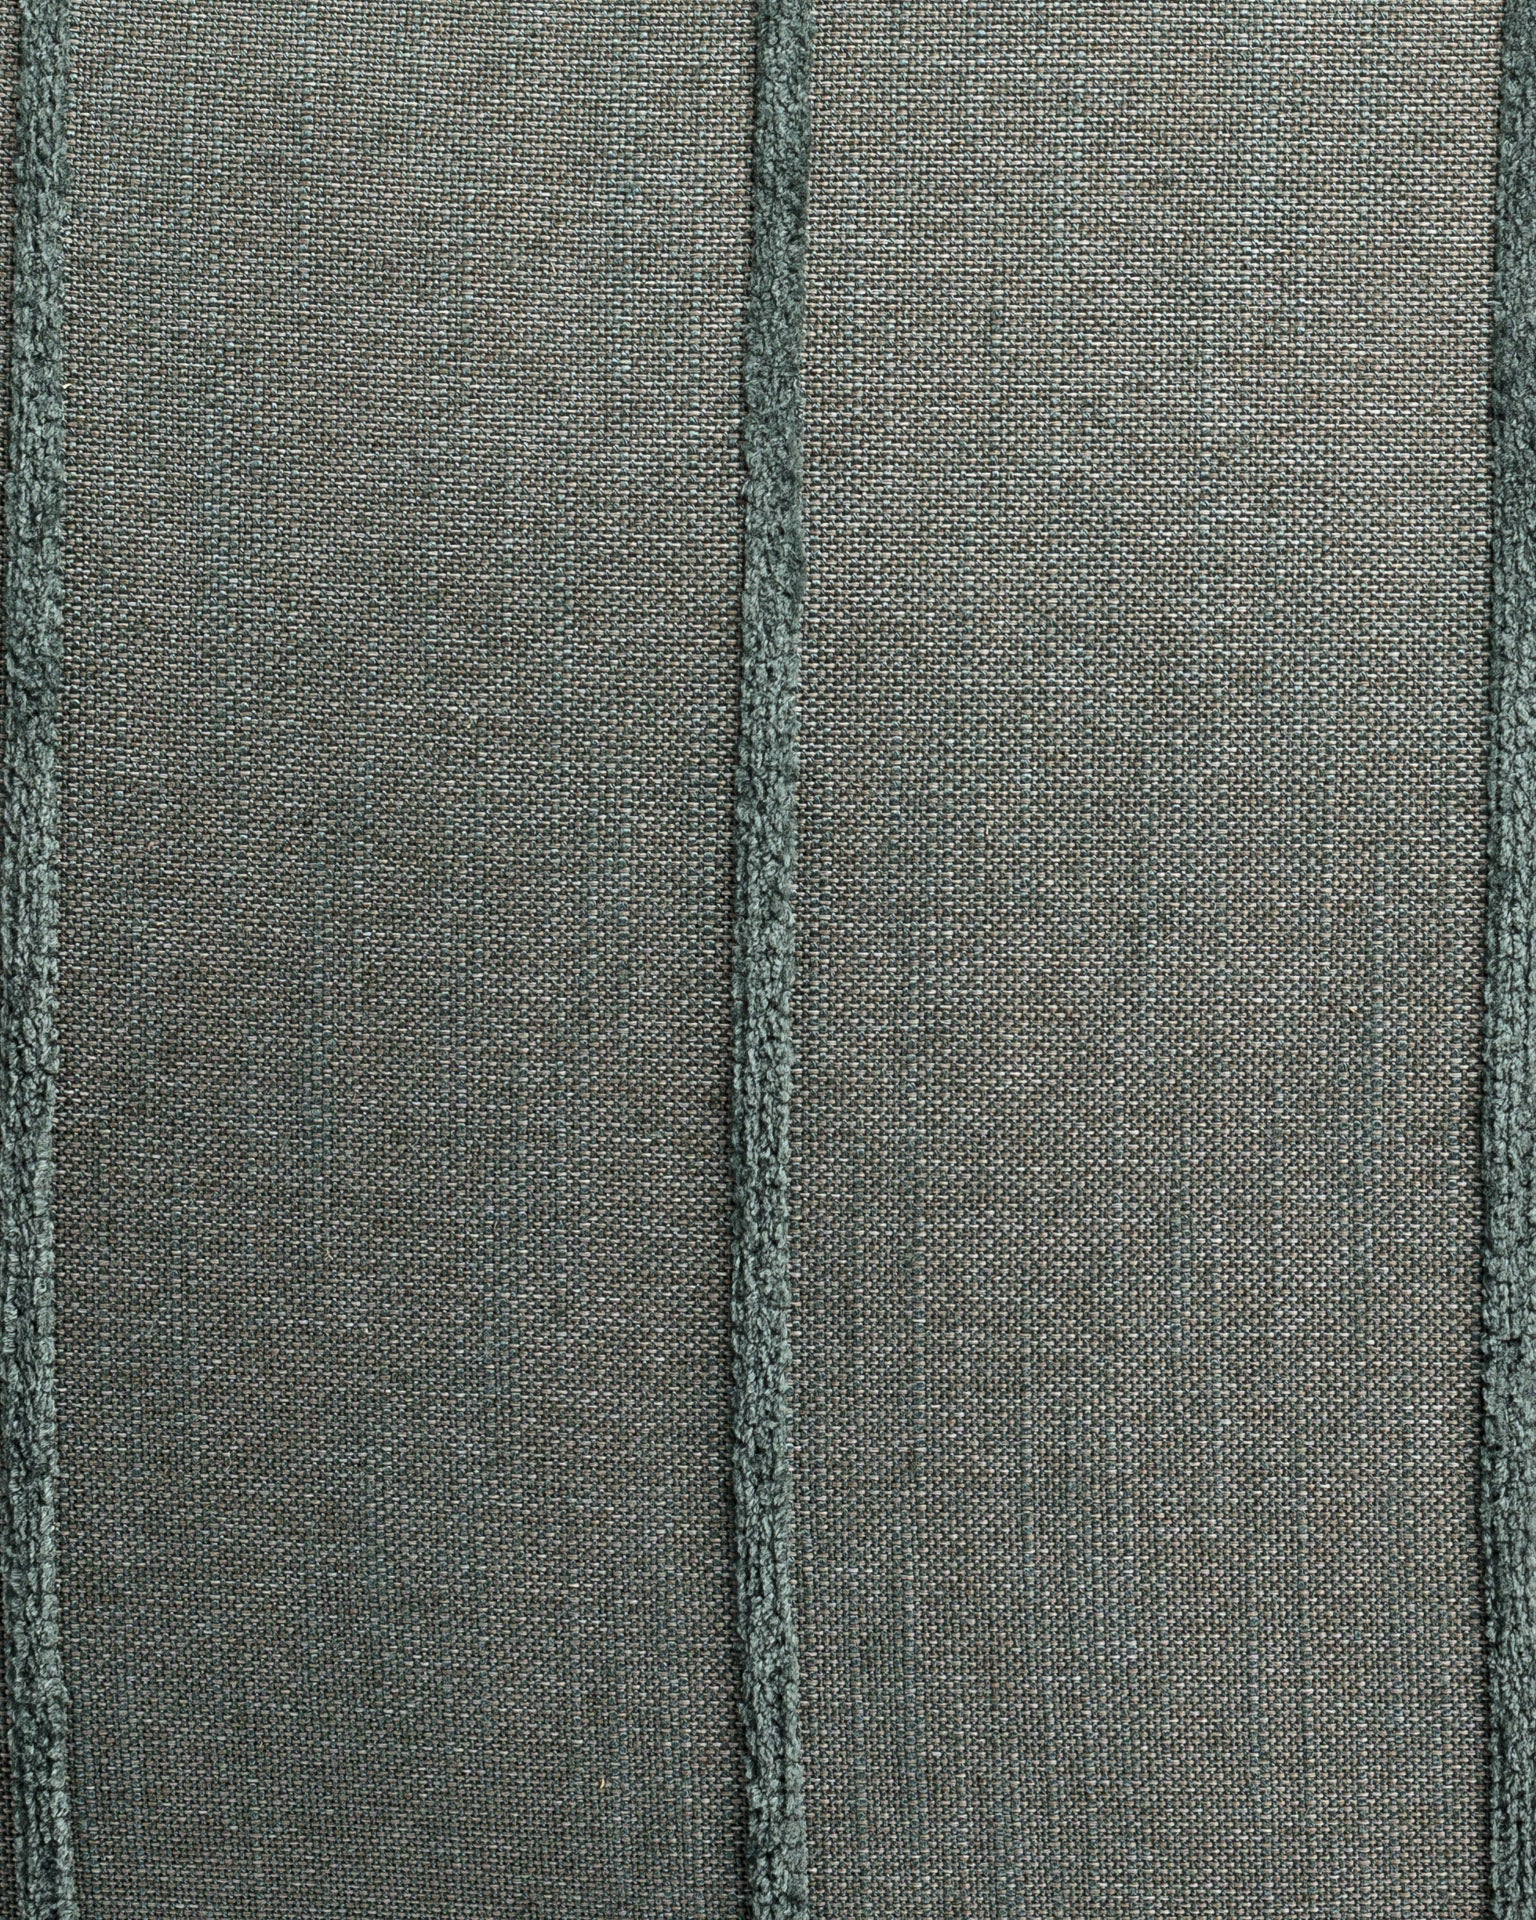 Close-up of a Gabby Hilo Stripe Blue Spruce Pillow 26x26 with visible seam lines and fine stitching detail, highlighting the weave and threads in a bungalow style.